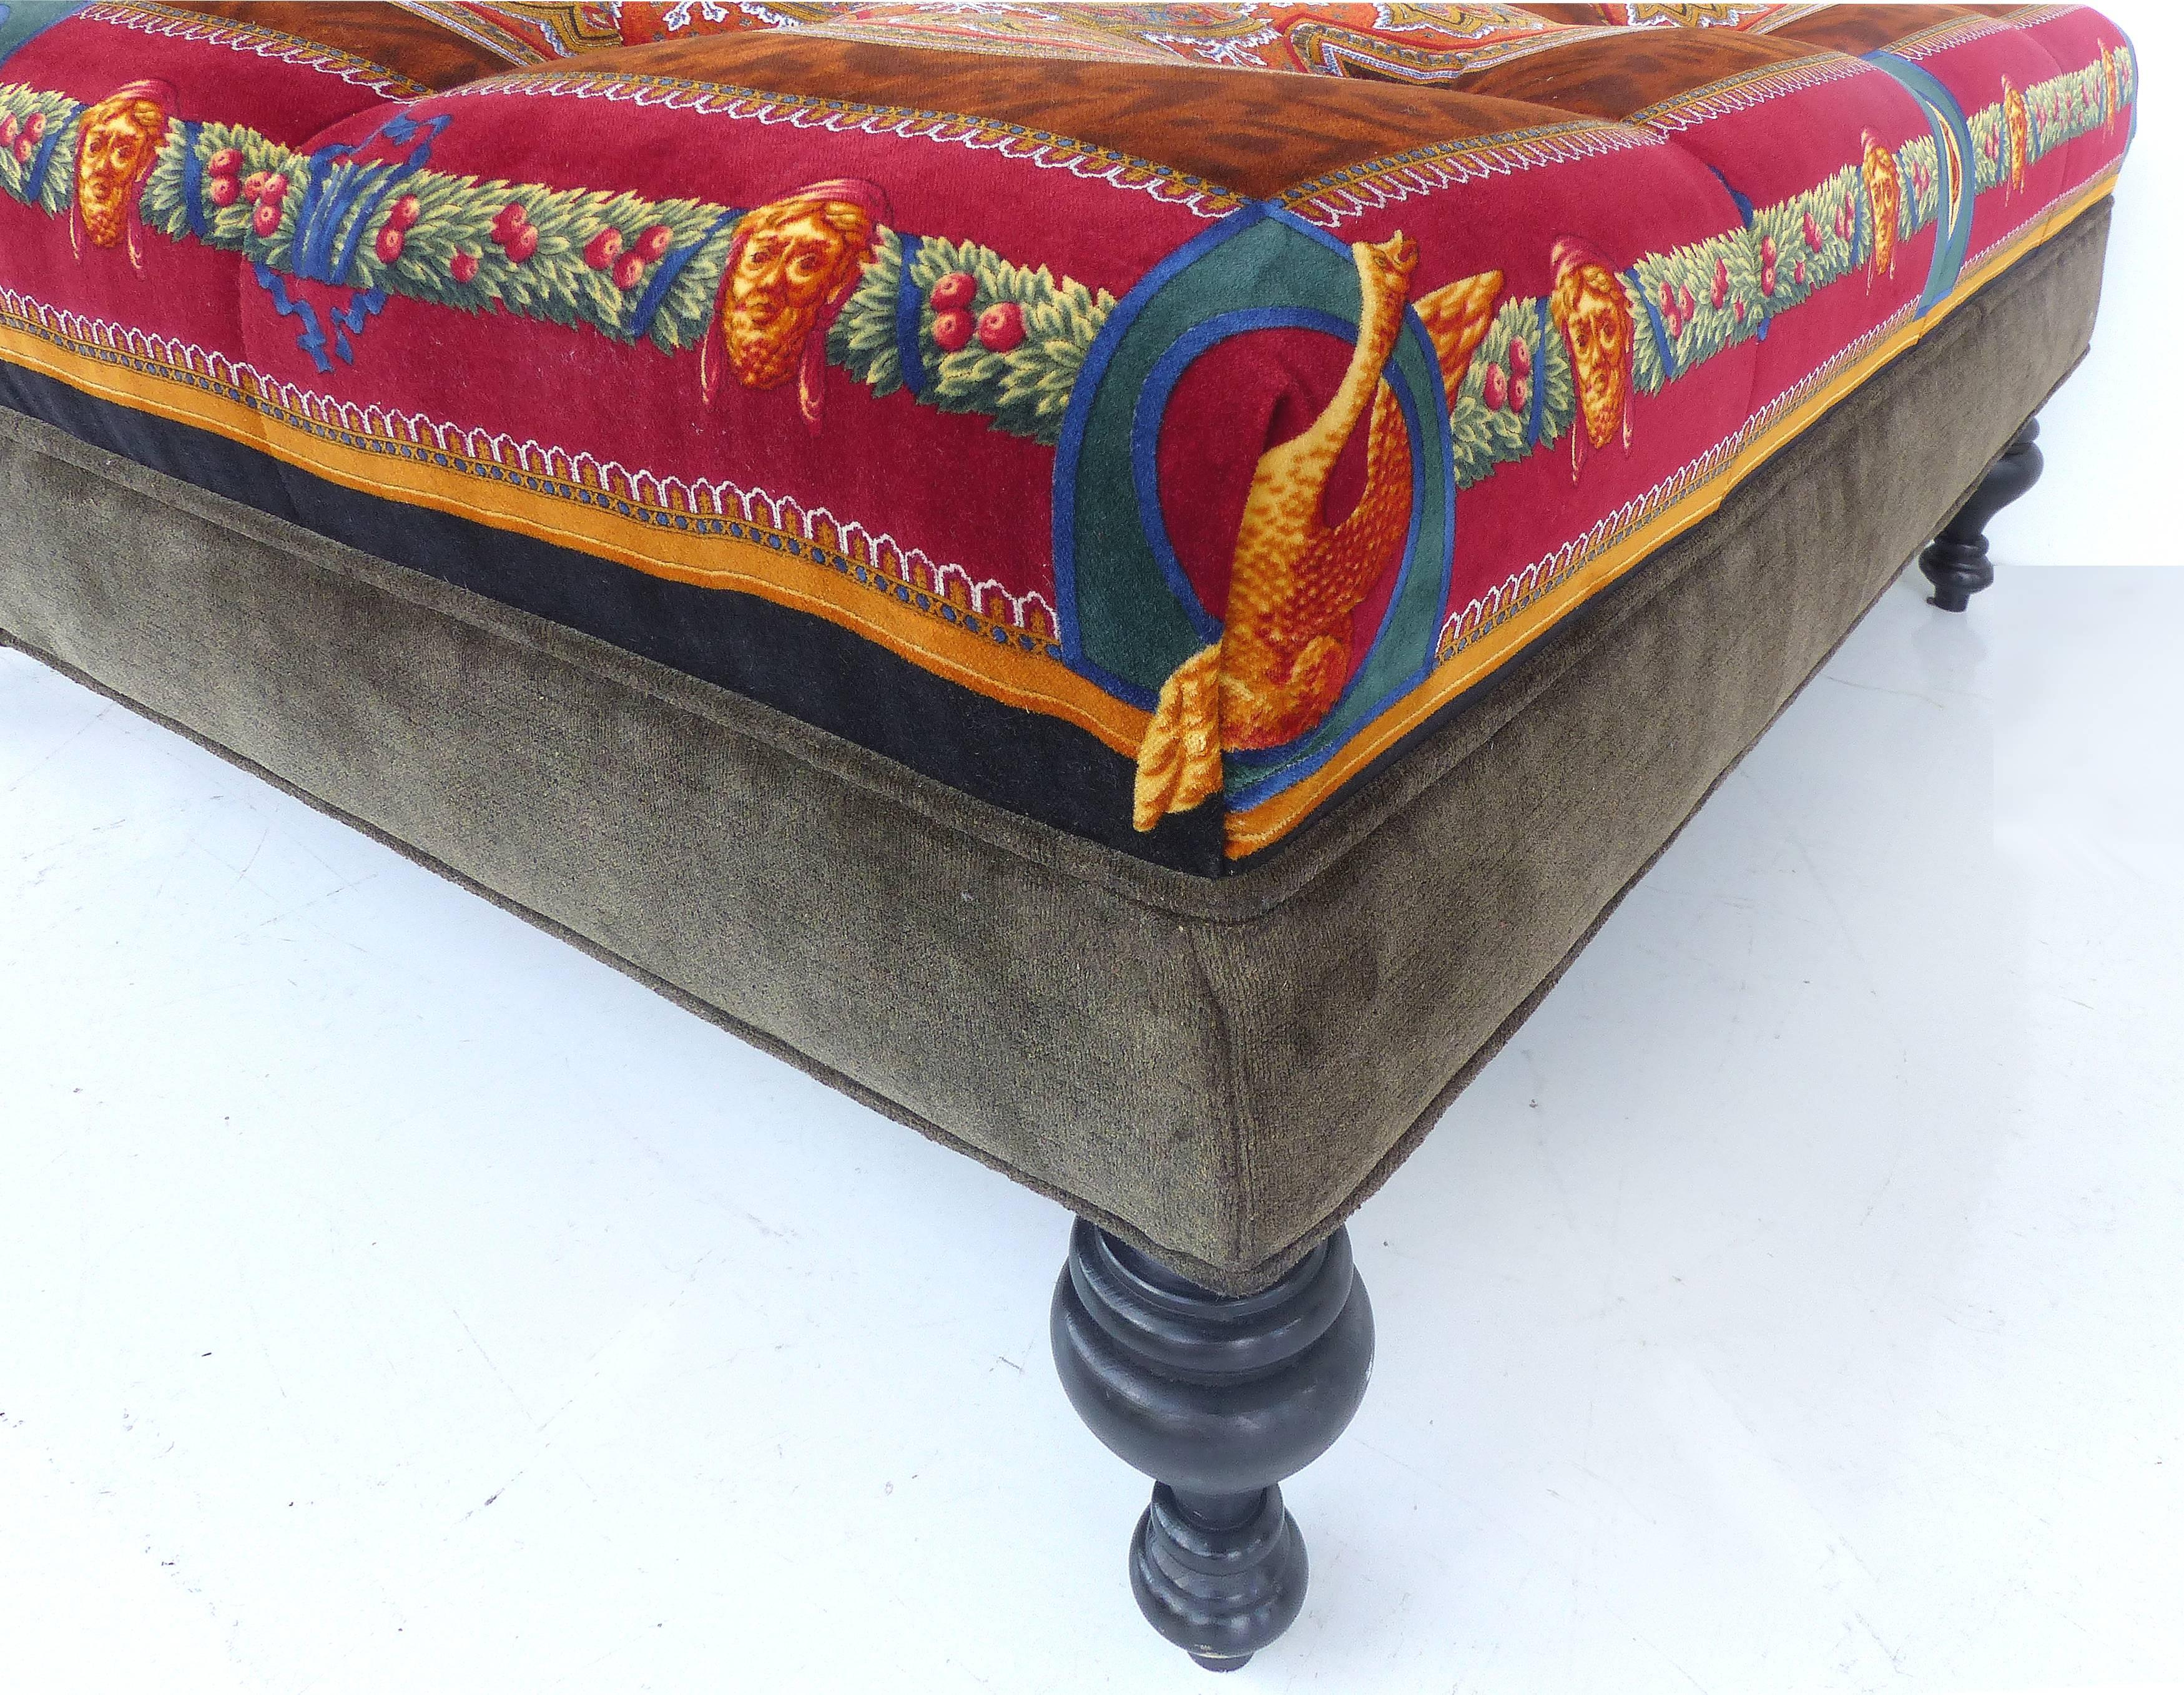 Rare Atelier Versace Tufted Upholstered Square Bench Ottoman Coffee Table 1